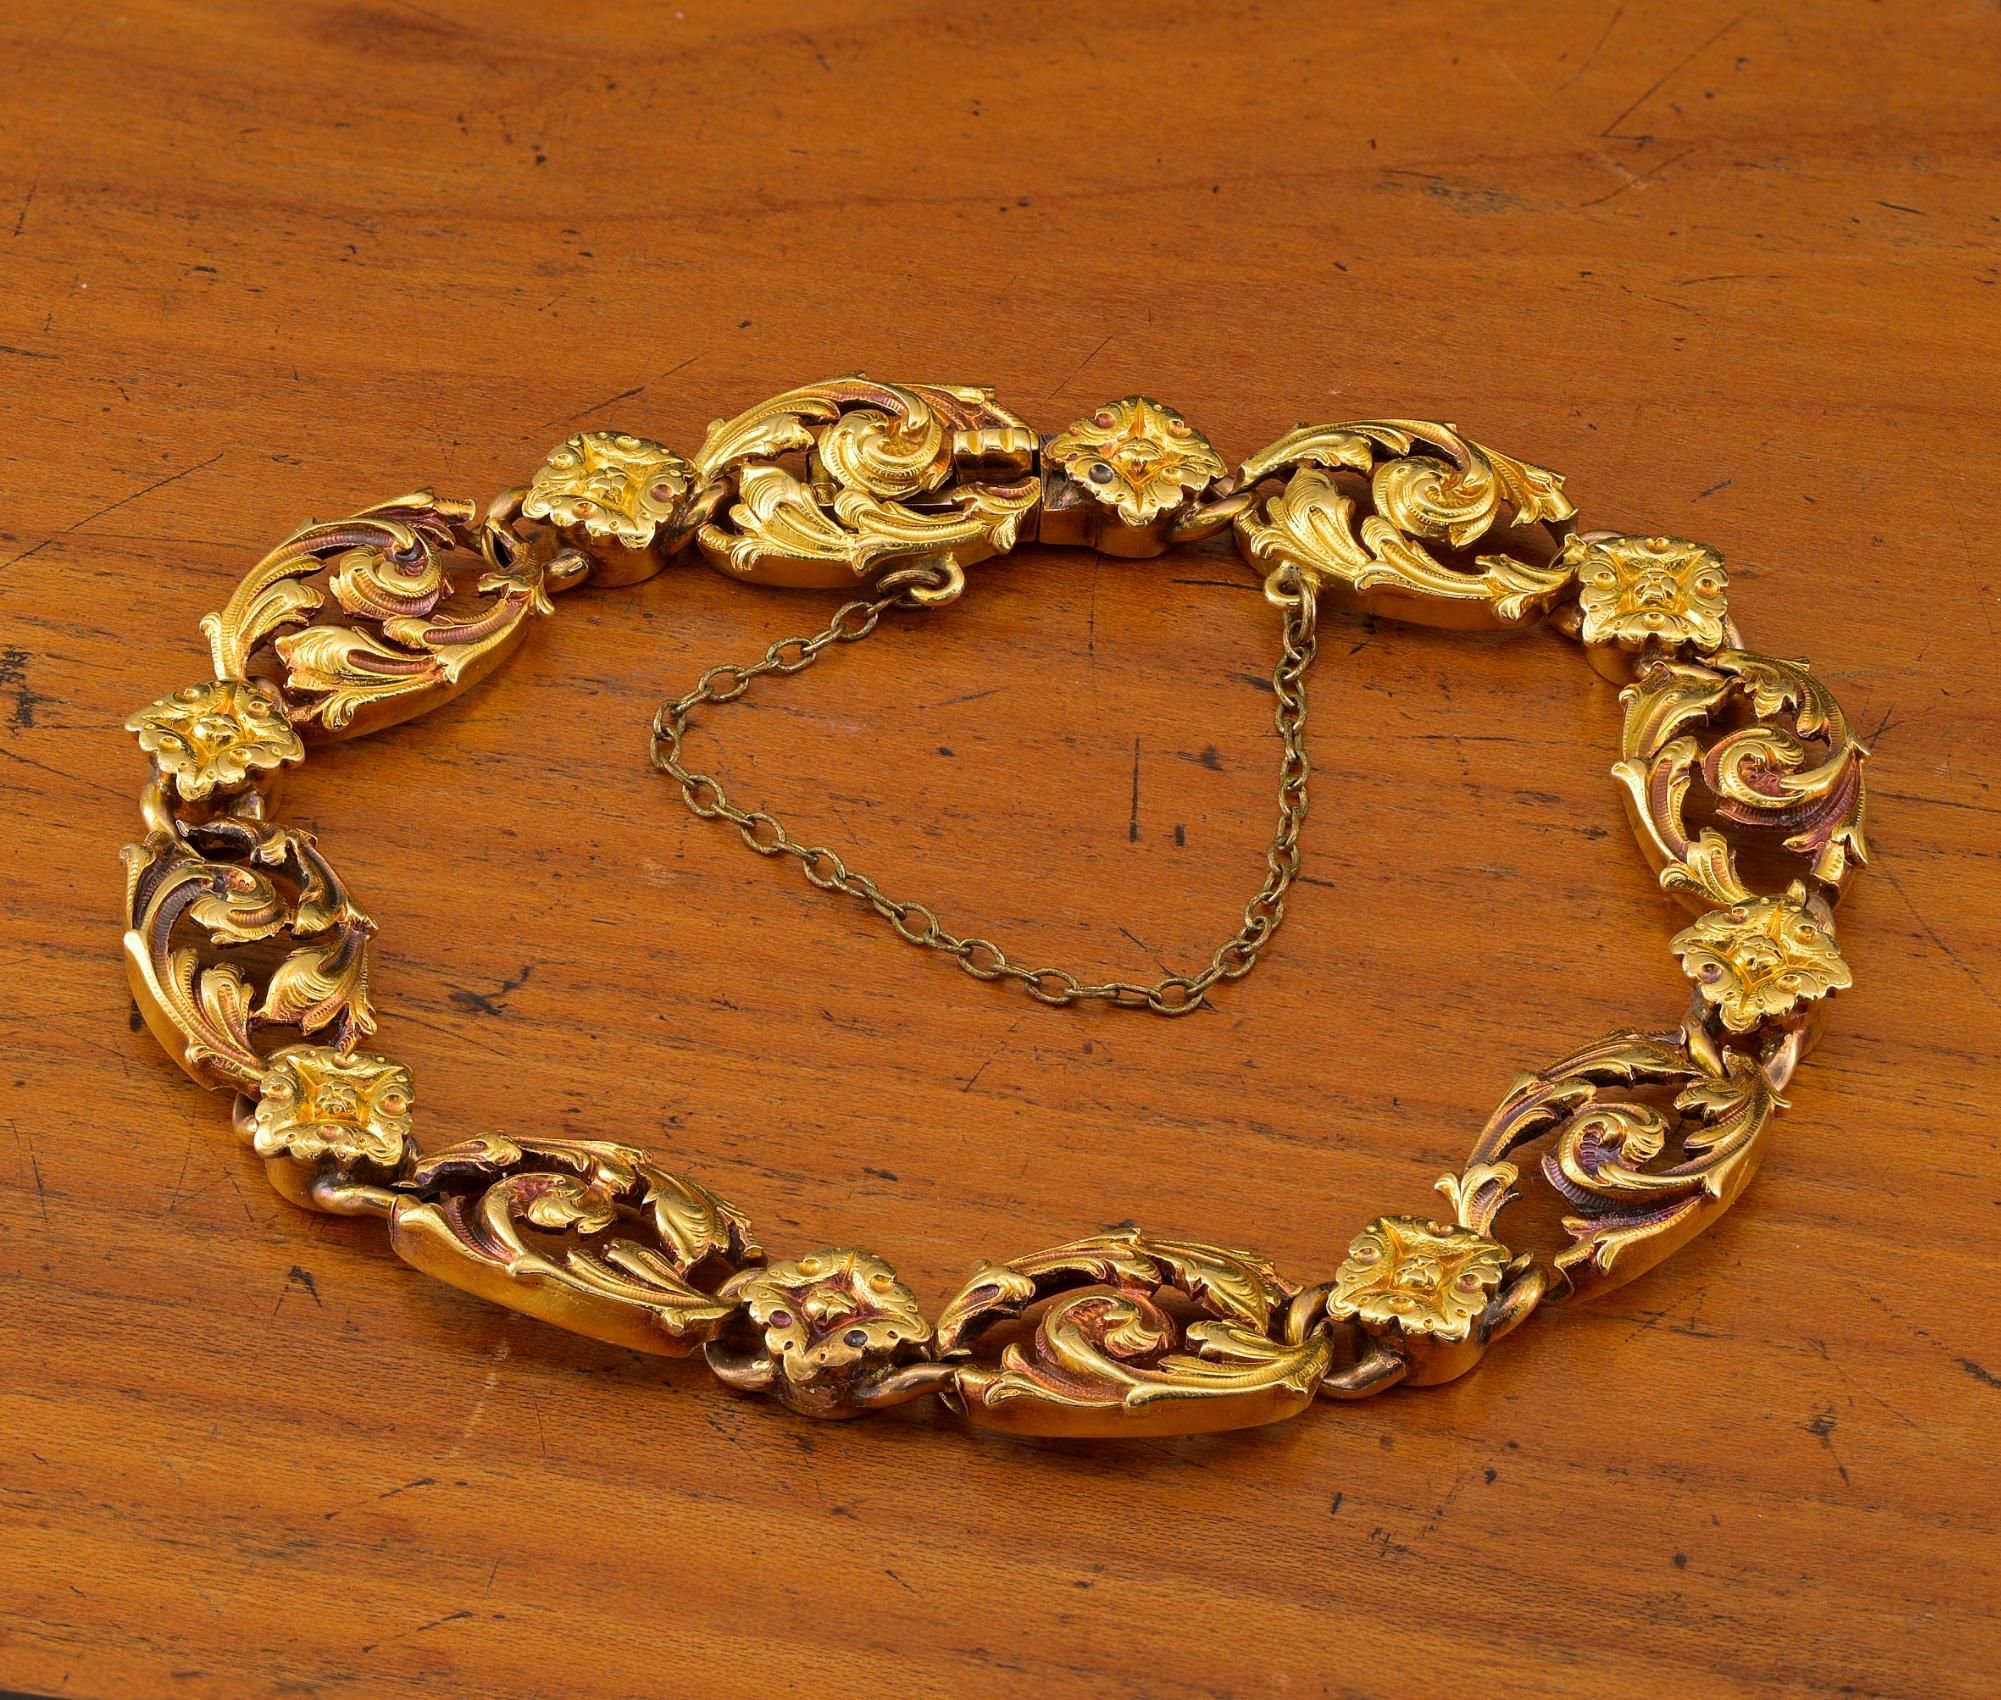 Superb Art Nouveau 18 Kt solid gold bracelet, 1895 ca
French hallmarks
Art Nouveau (“new art”) jewelry was created in France between about 1895 and 1910, in this time some of the most remarkable and impressive jewels were ever created by the major